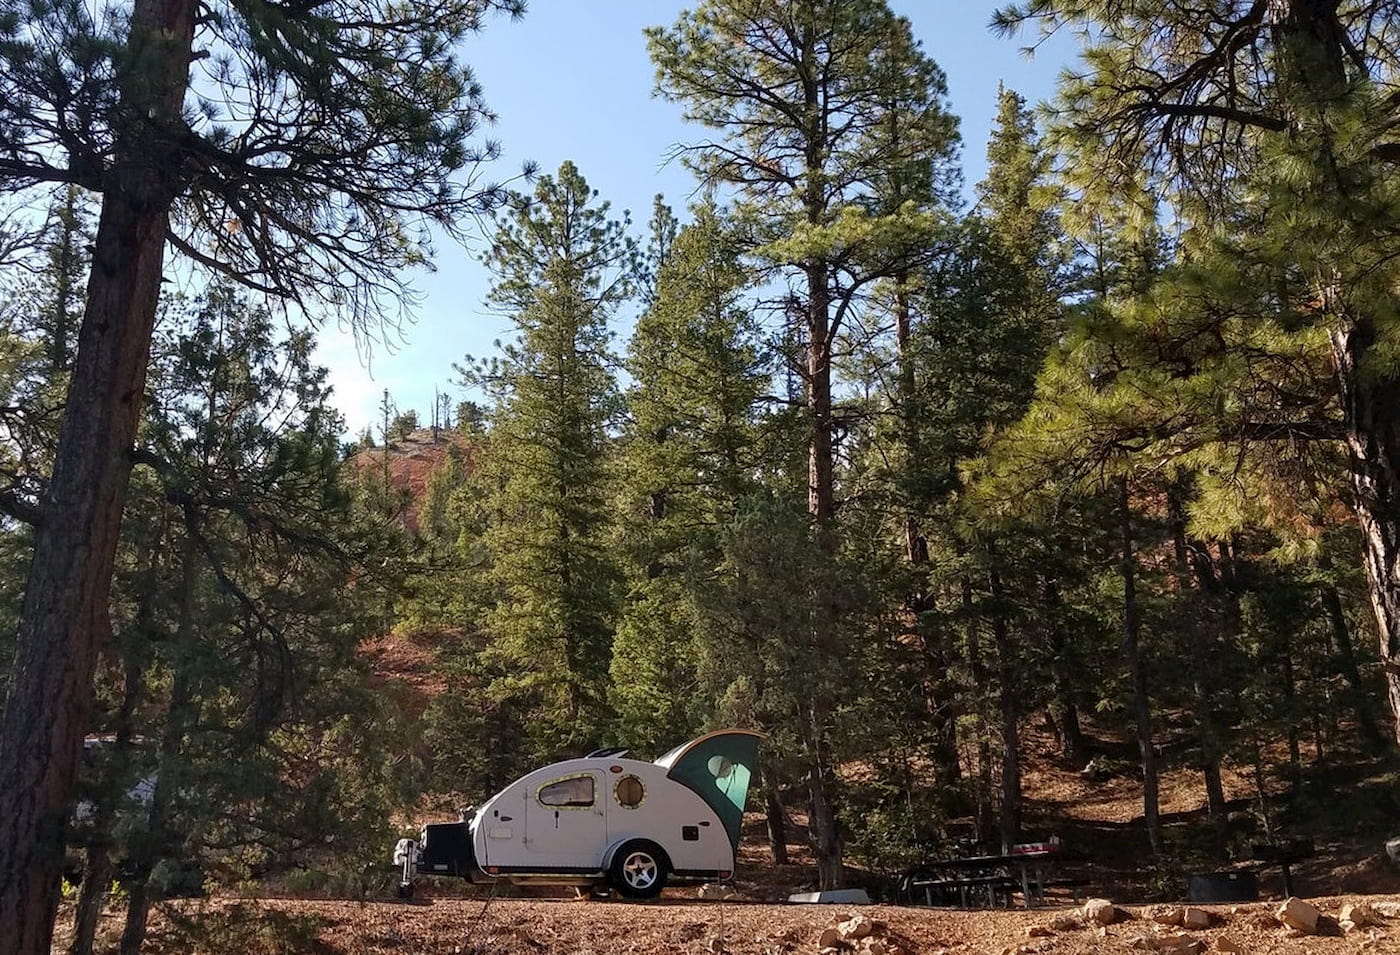 Teardrop trailer at Red Canyon campground.